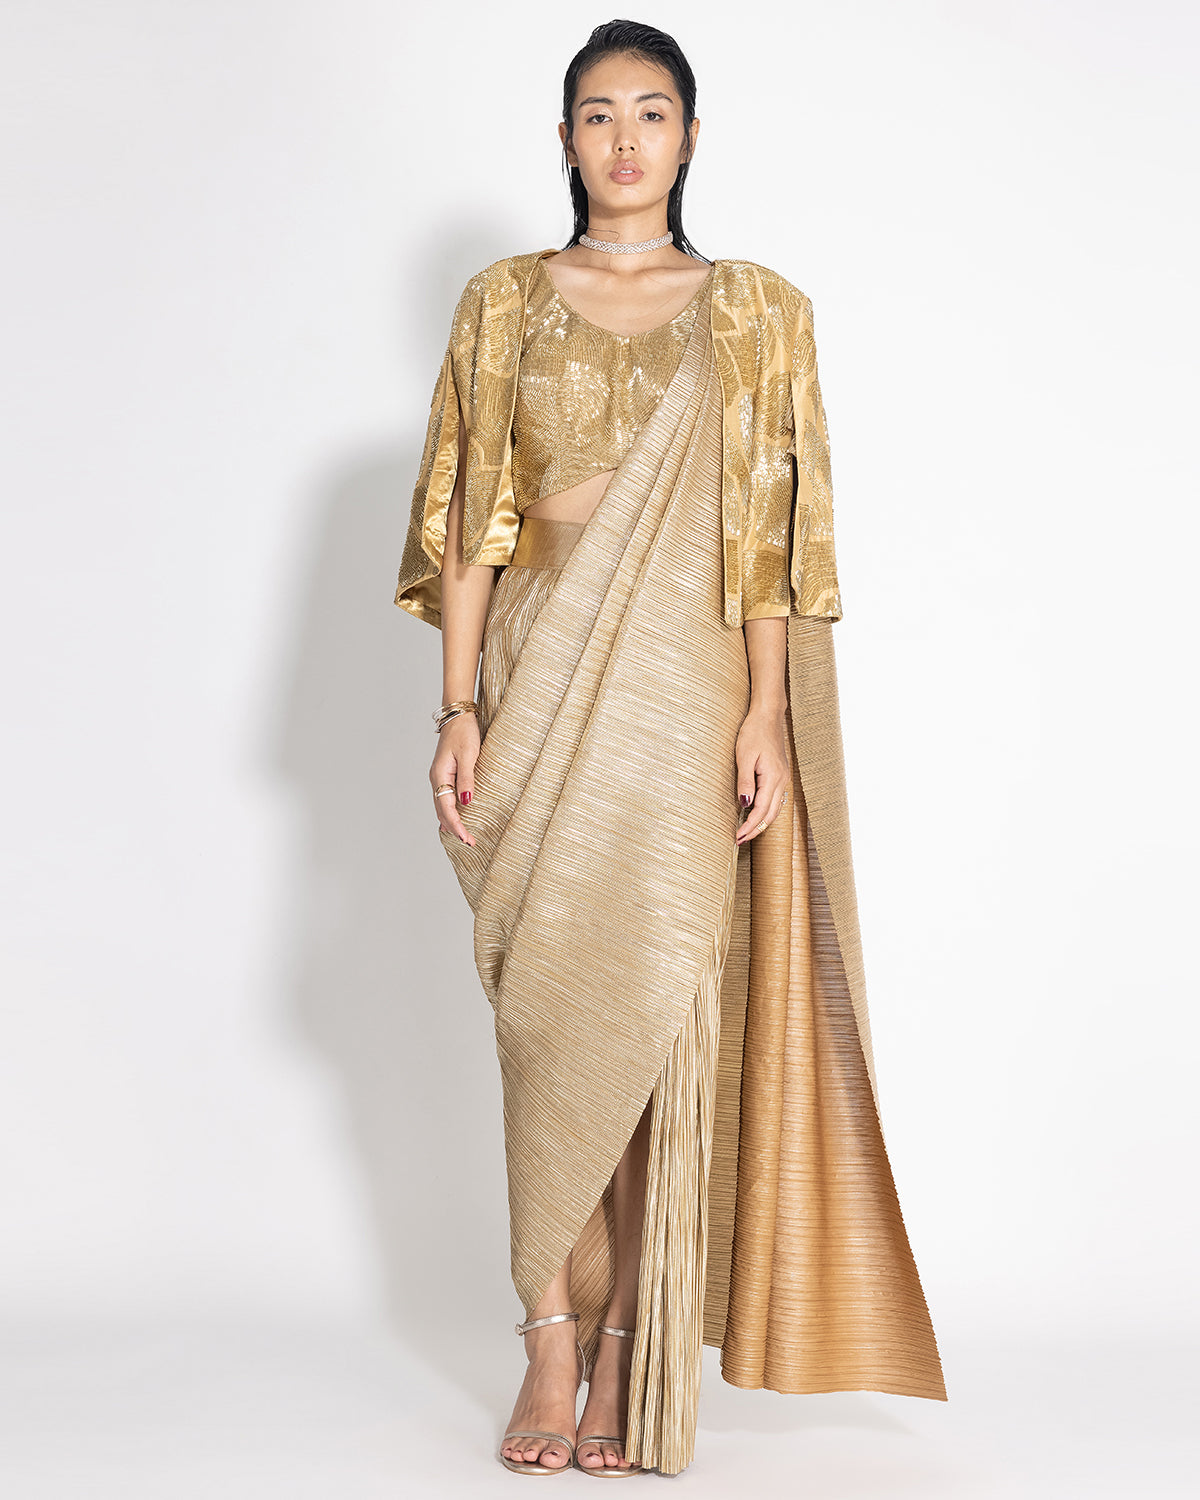 Metallic 2.0 Sari With Milkyway Crossover Top and Wave Cape